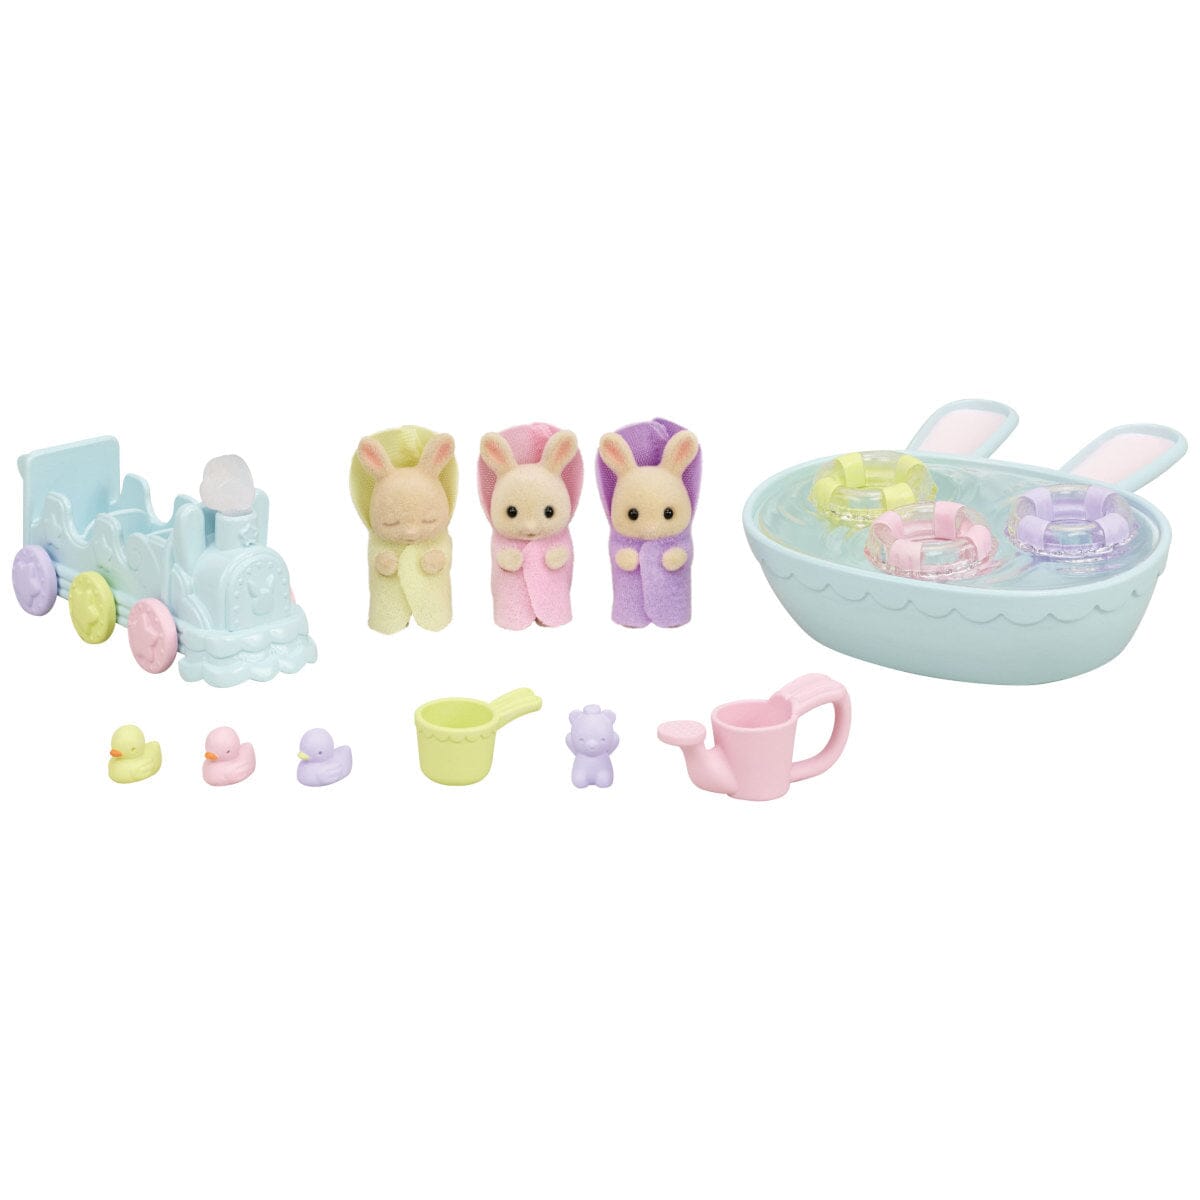 Triplets Baby Bathtime Set by Calico Critters